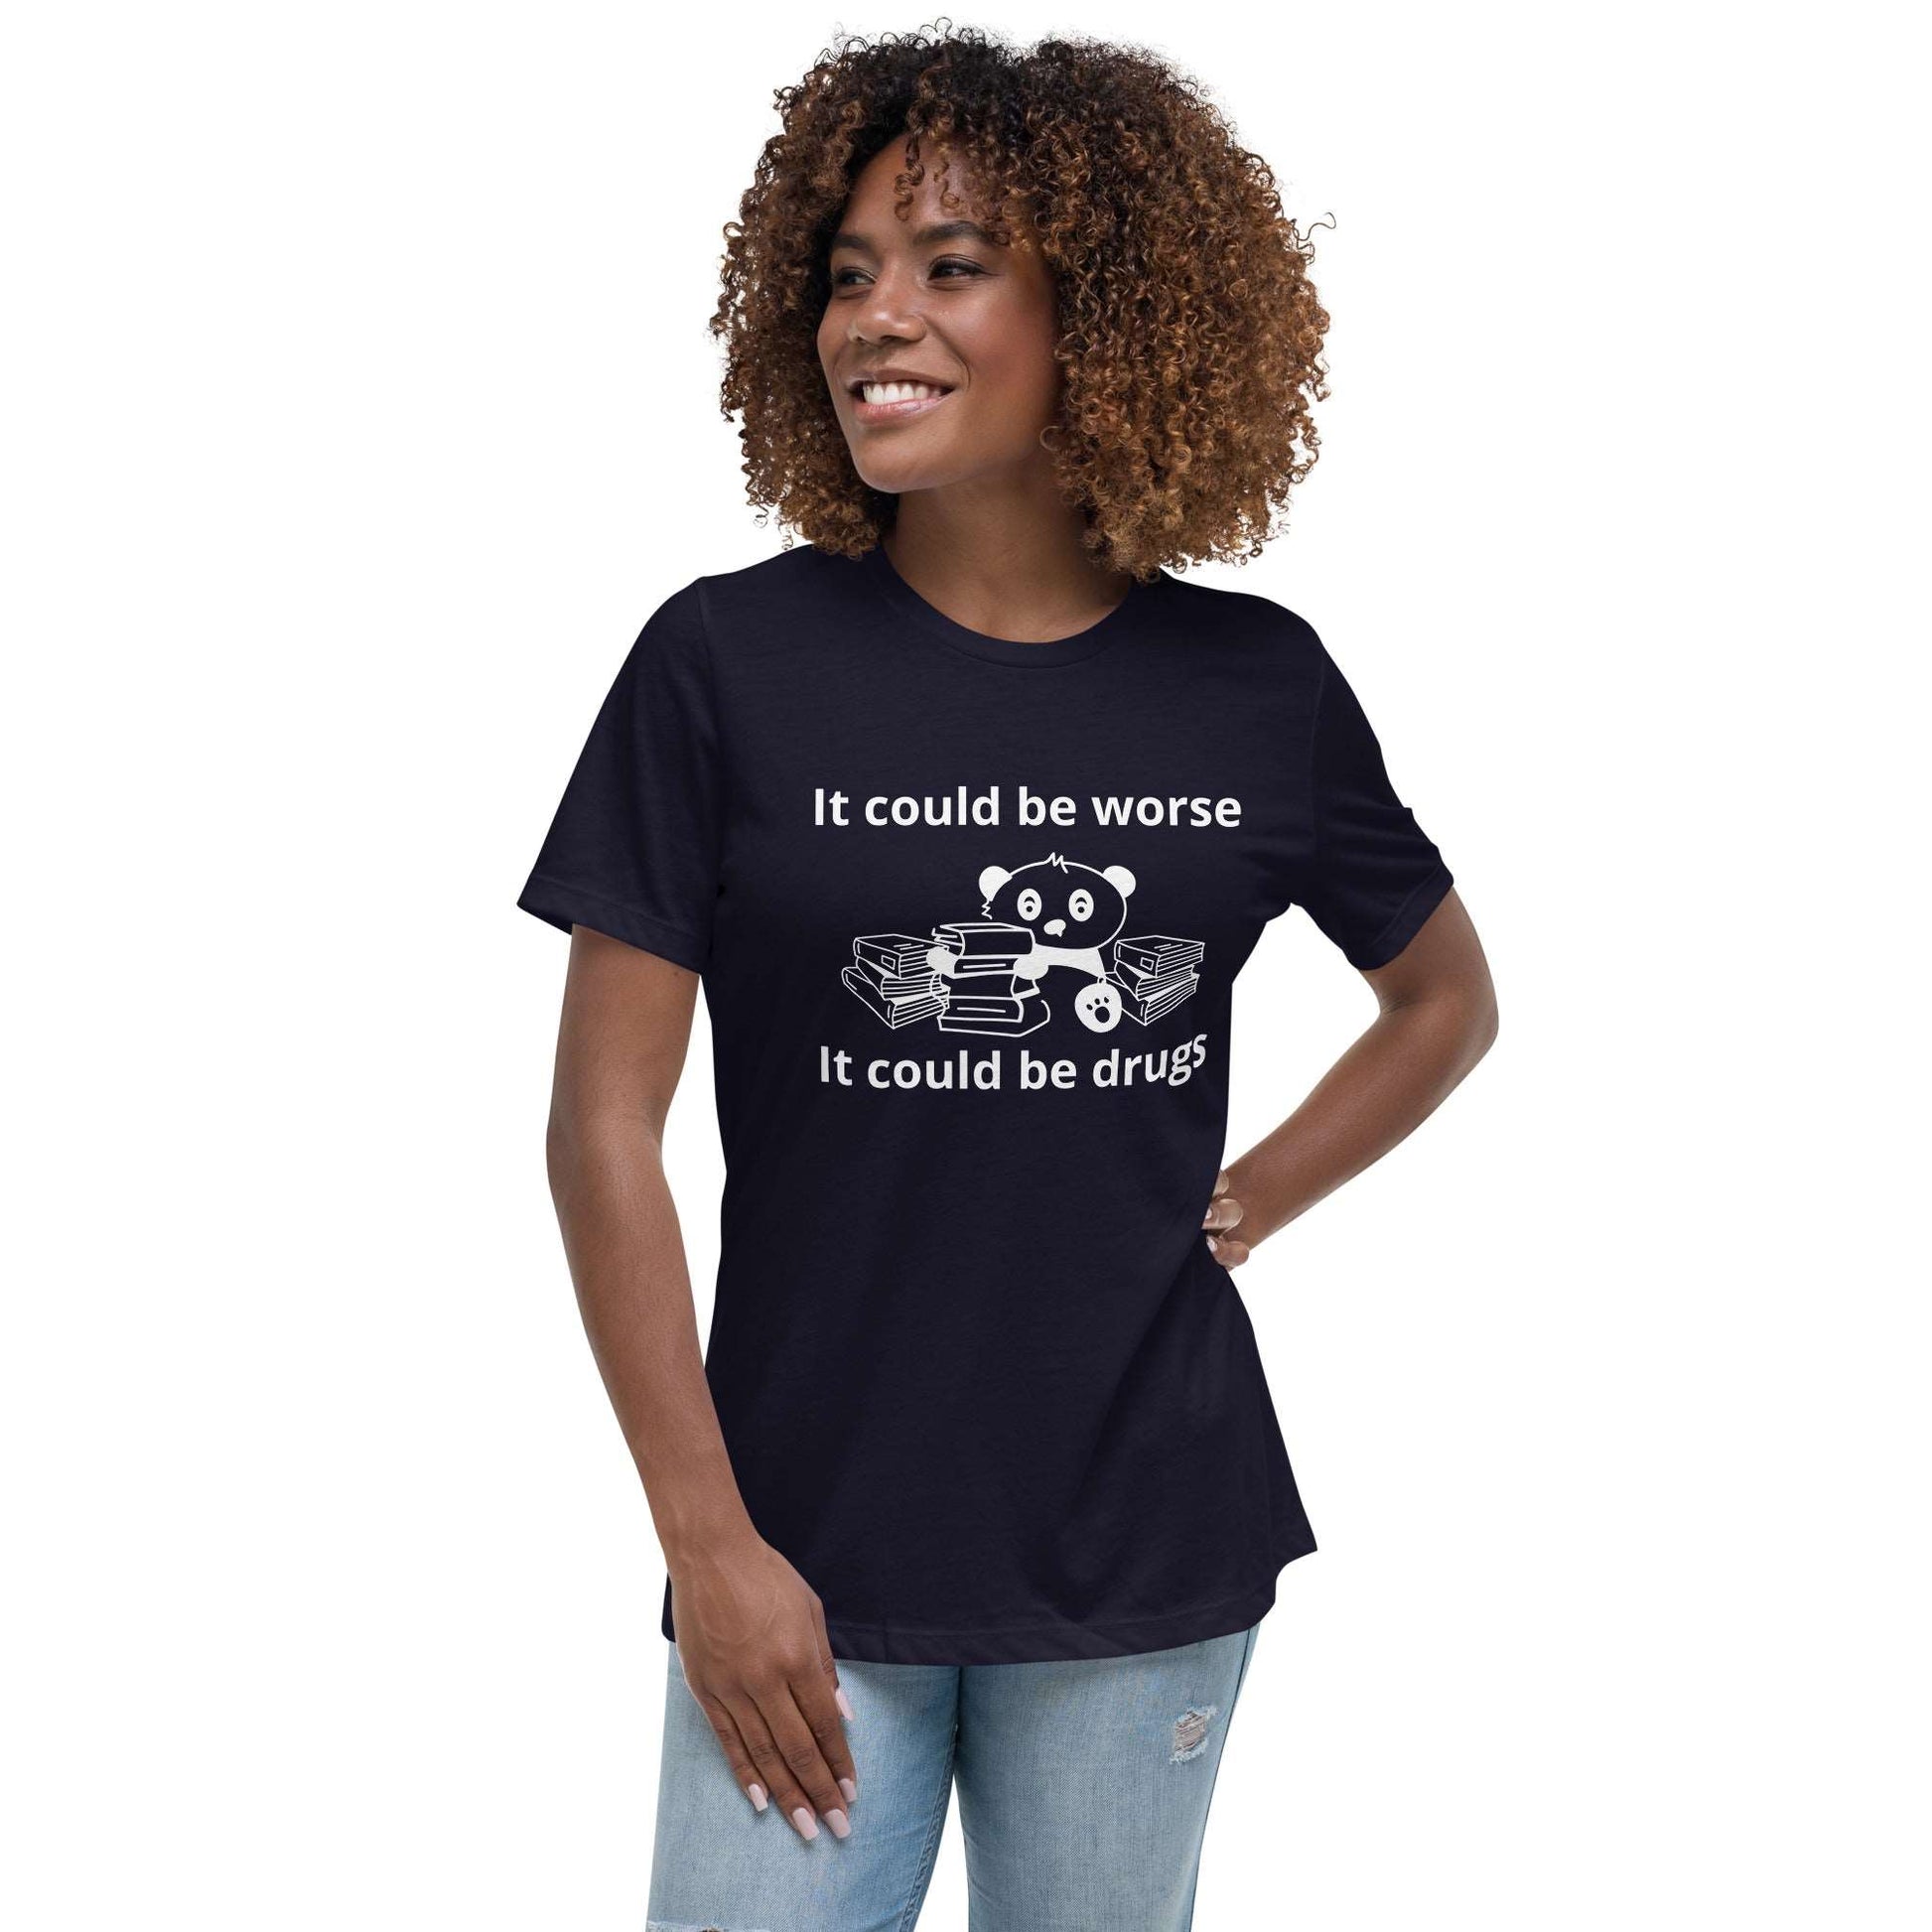 It could be worse Women's Relaxed T-Shirt